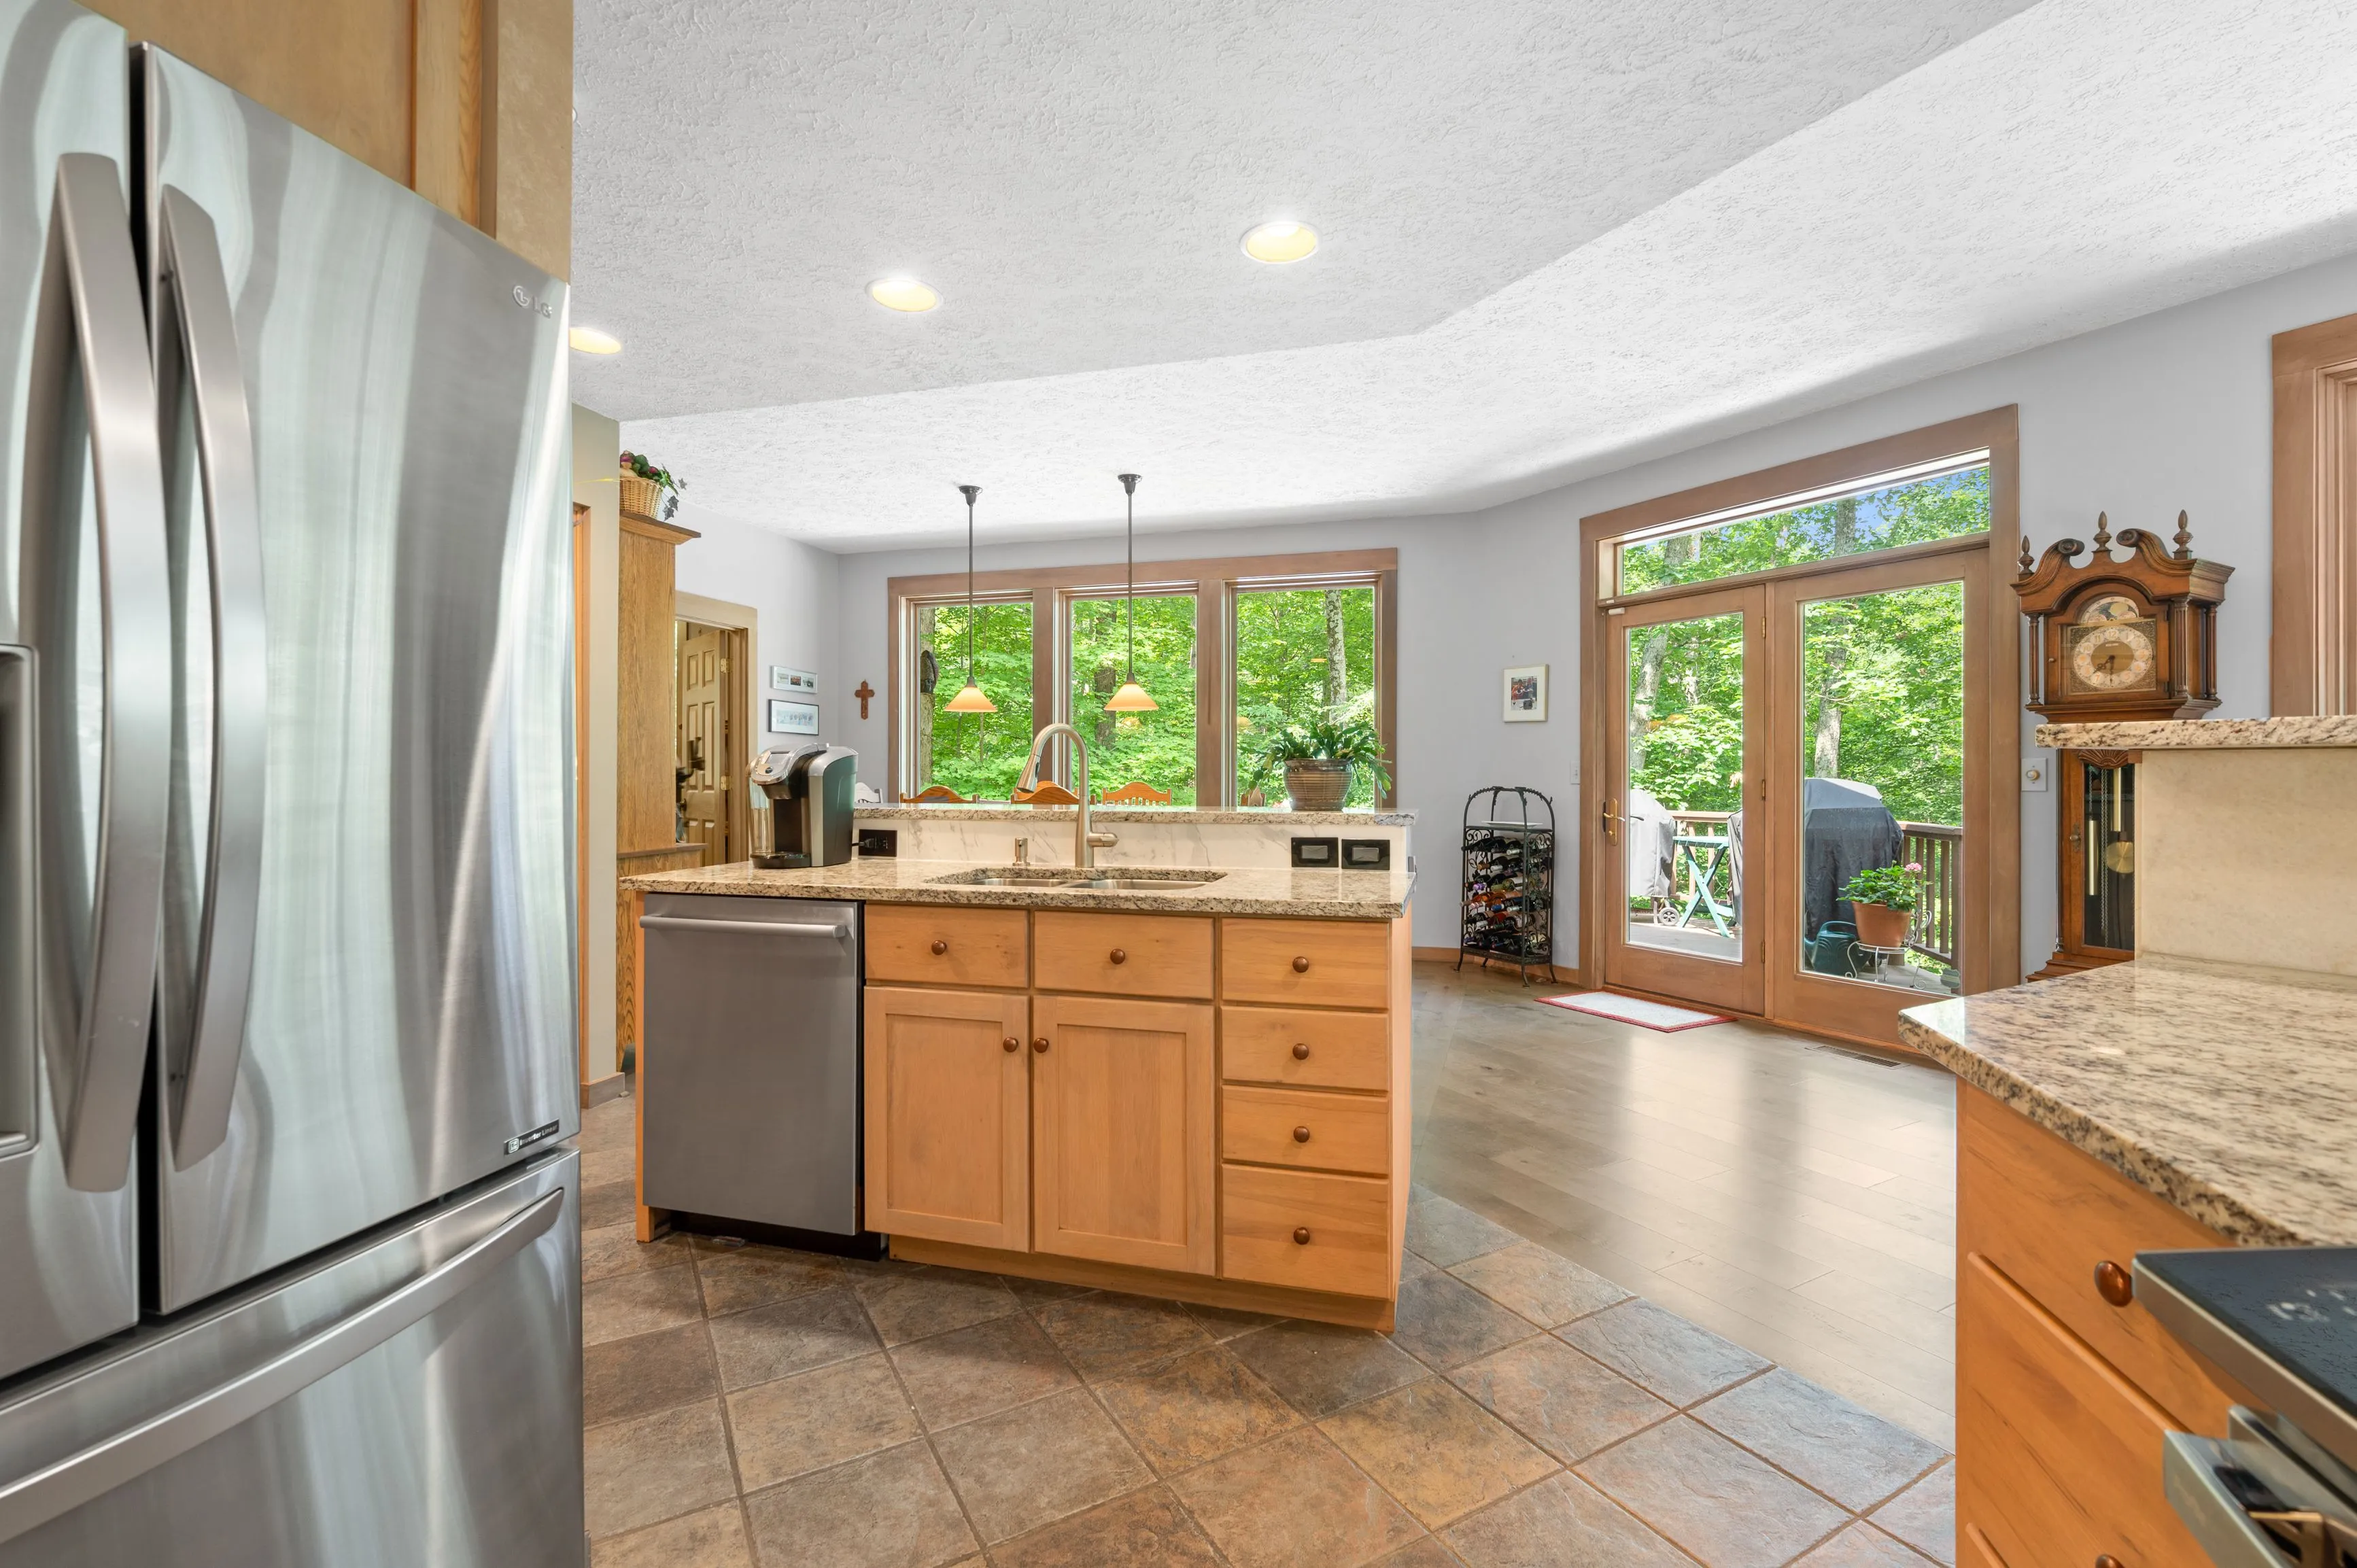 Bright modern kitchen with stainless steel refrigerator, wooden cabinets, and a view of greenery outside the window.